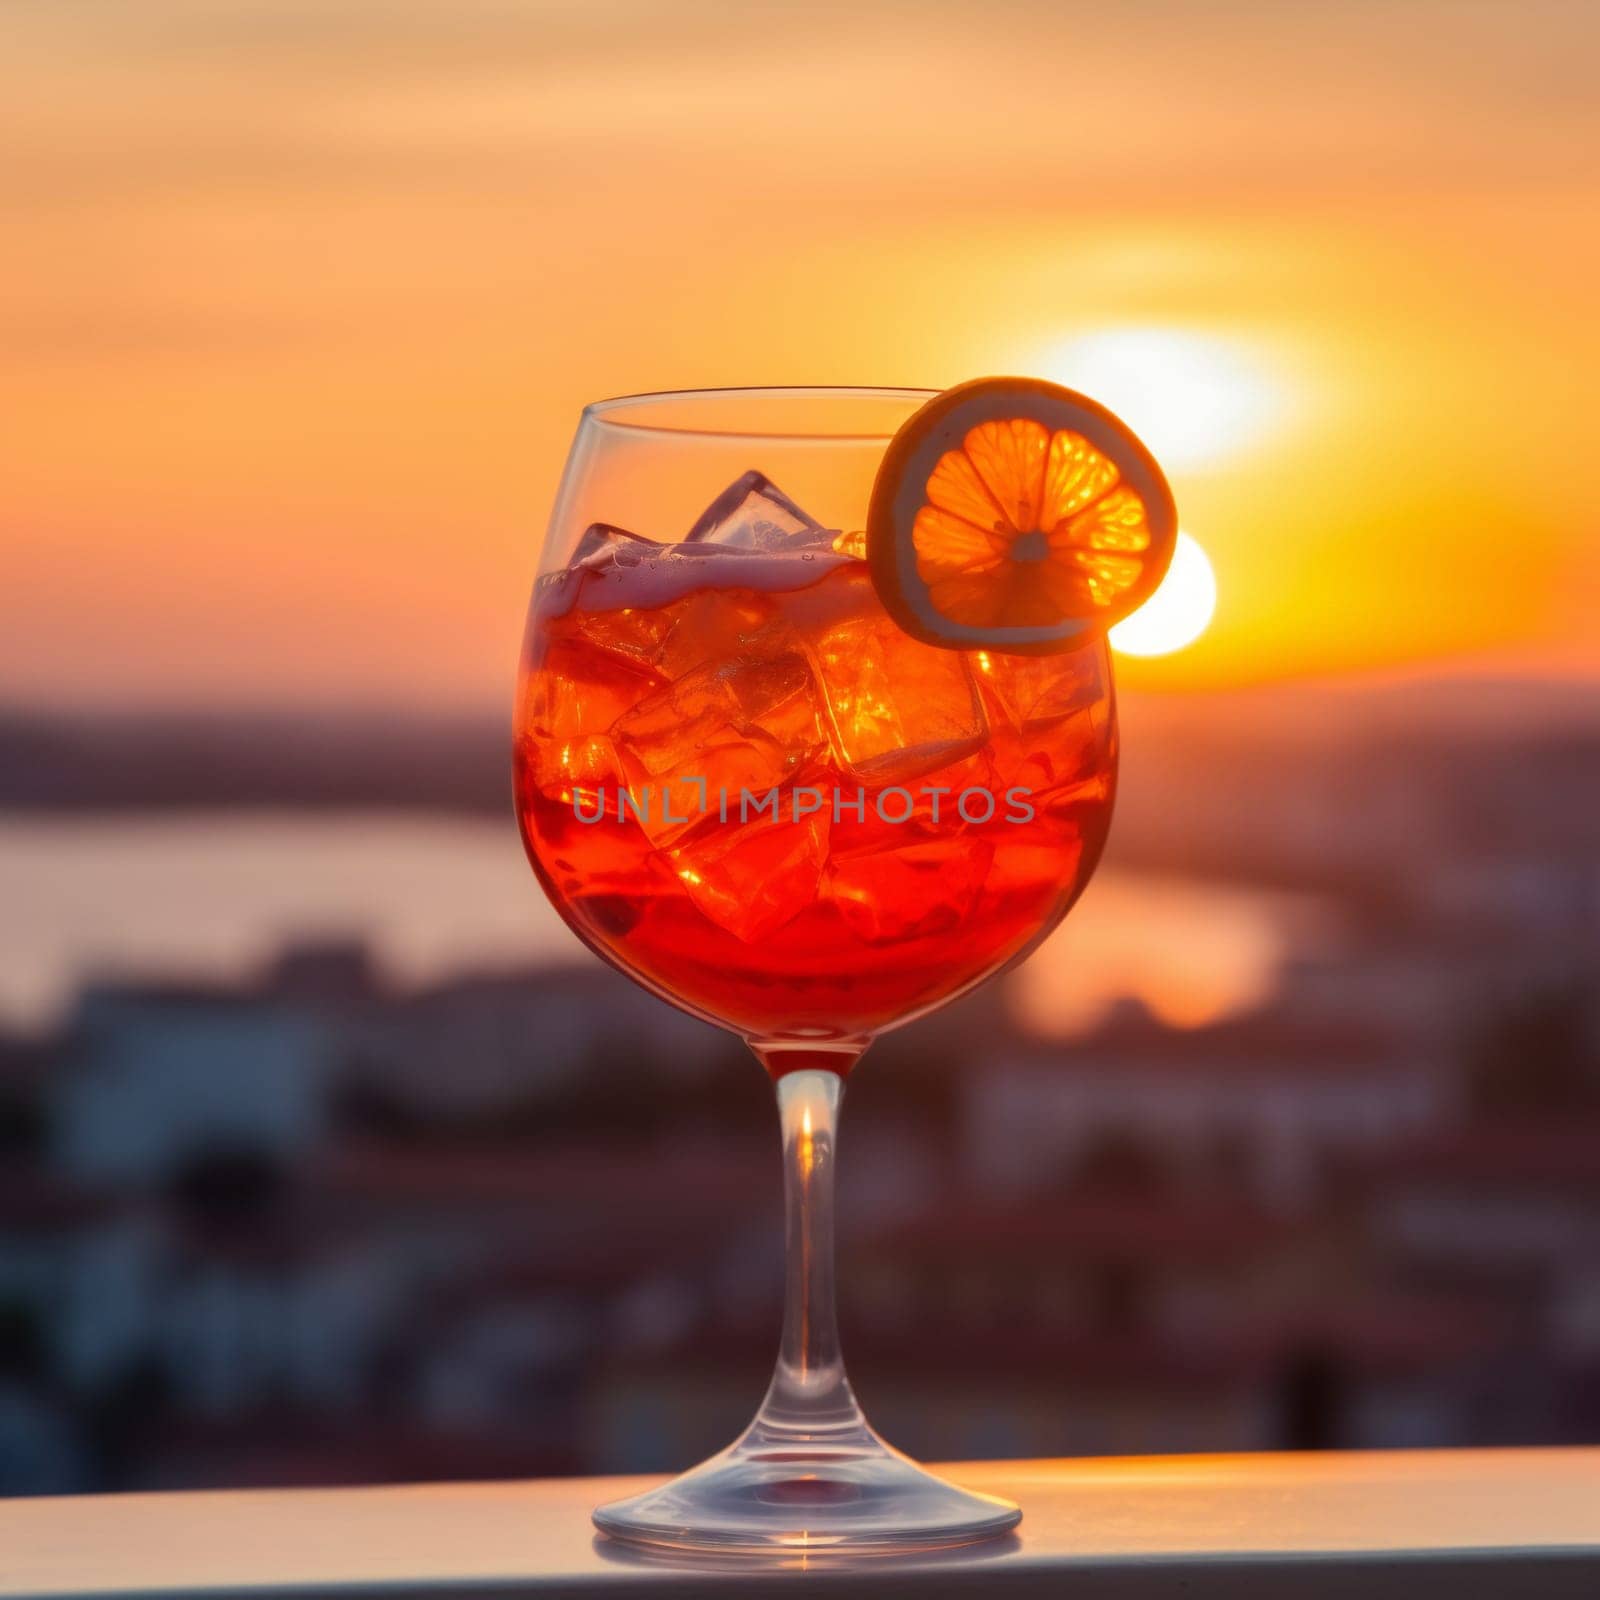 Aperol Spritz Cocktail on sunset. Alcoholic beverage based on table with ice cubes and oranges